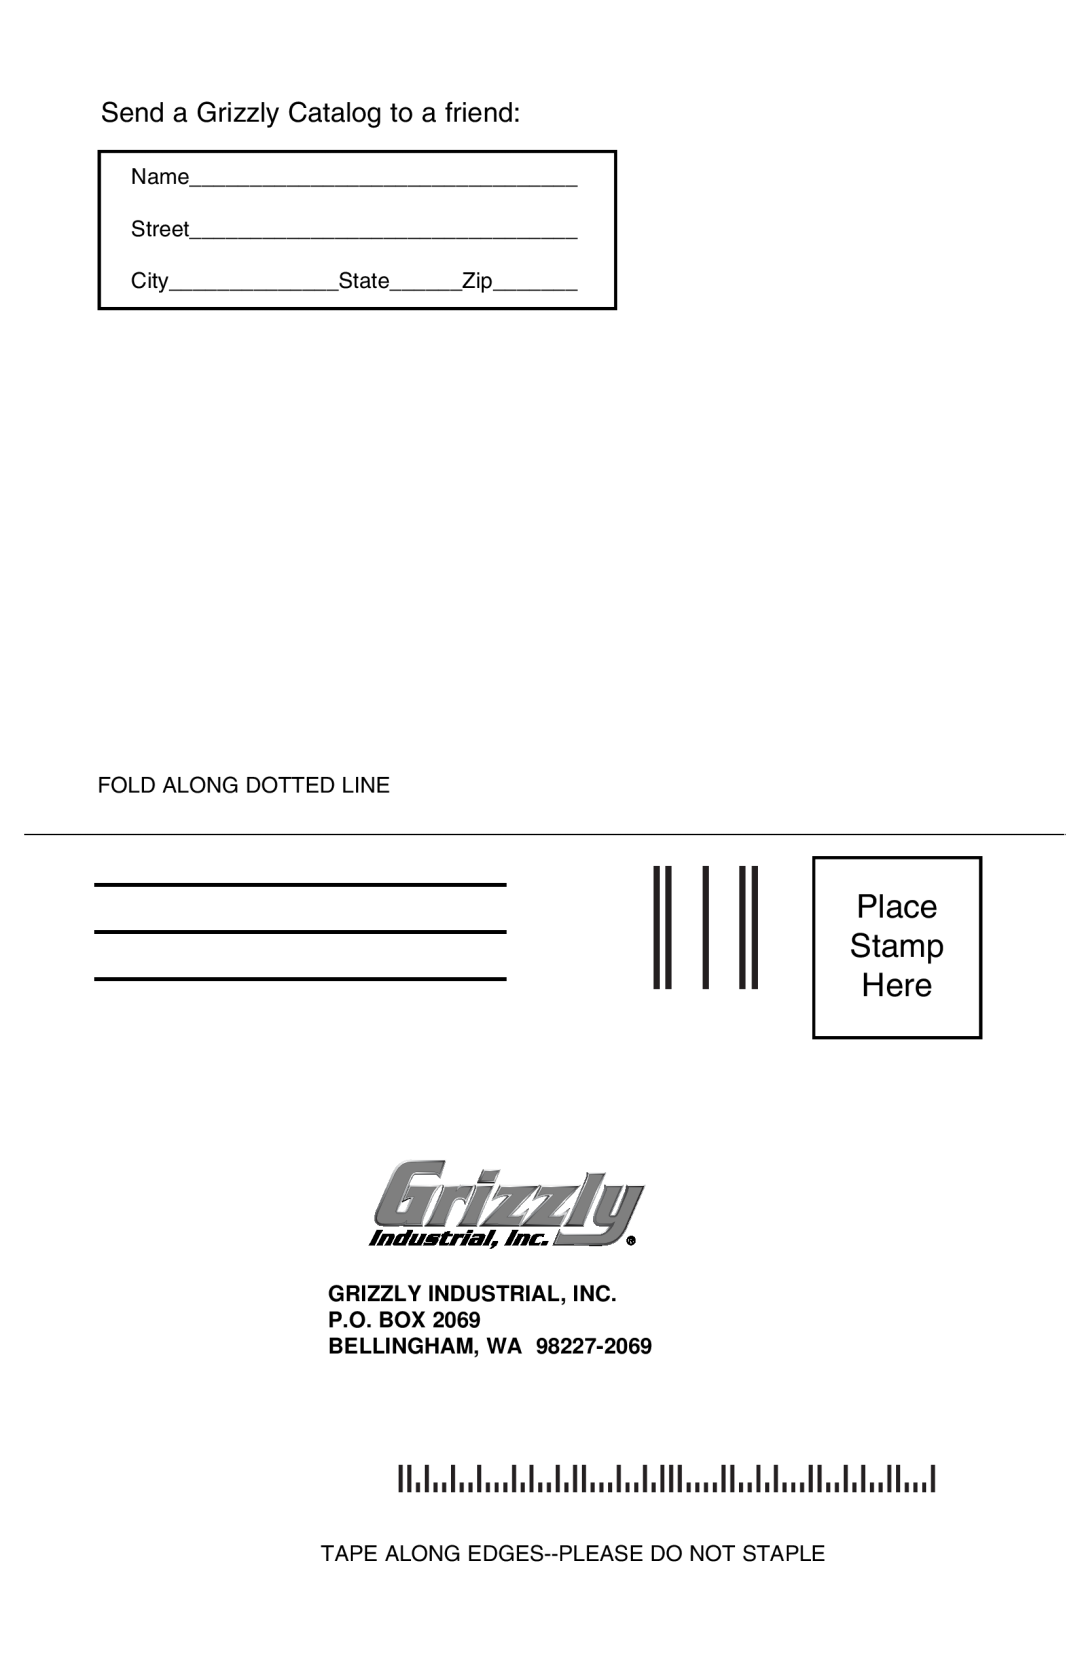 Grizzly H2867 instruction manual Place Stamp Here, Send a Grizzly Catalog to a friend 